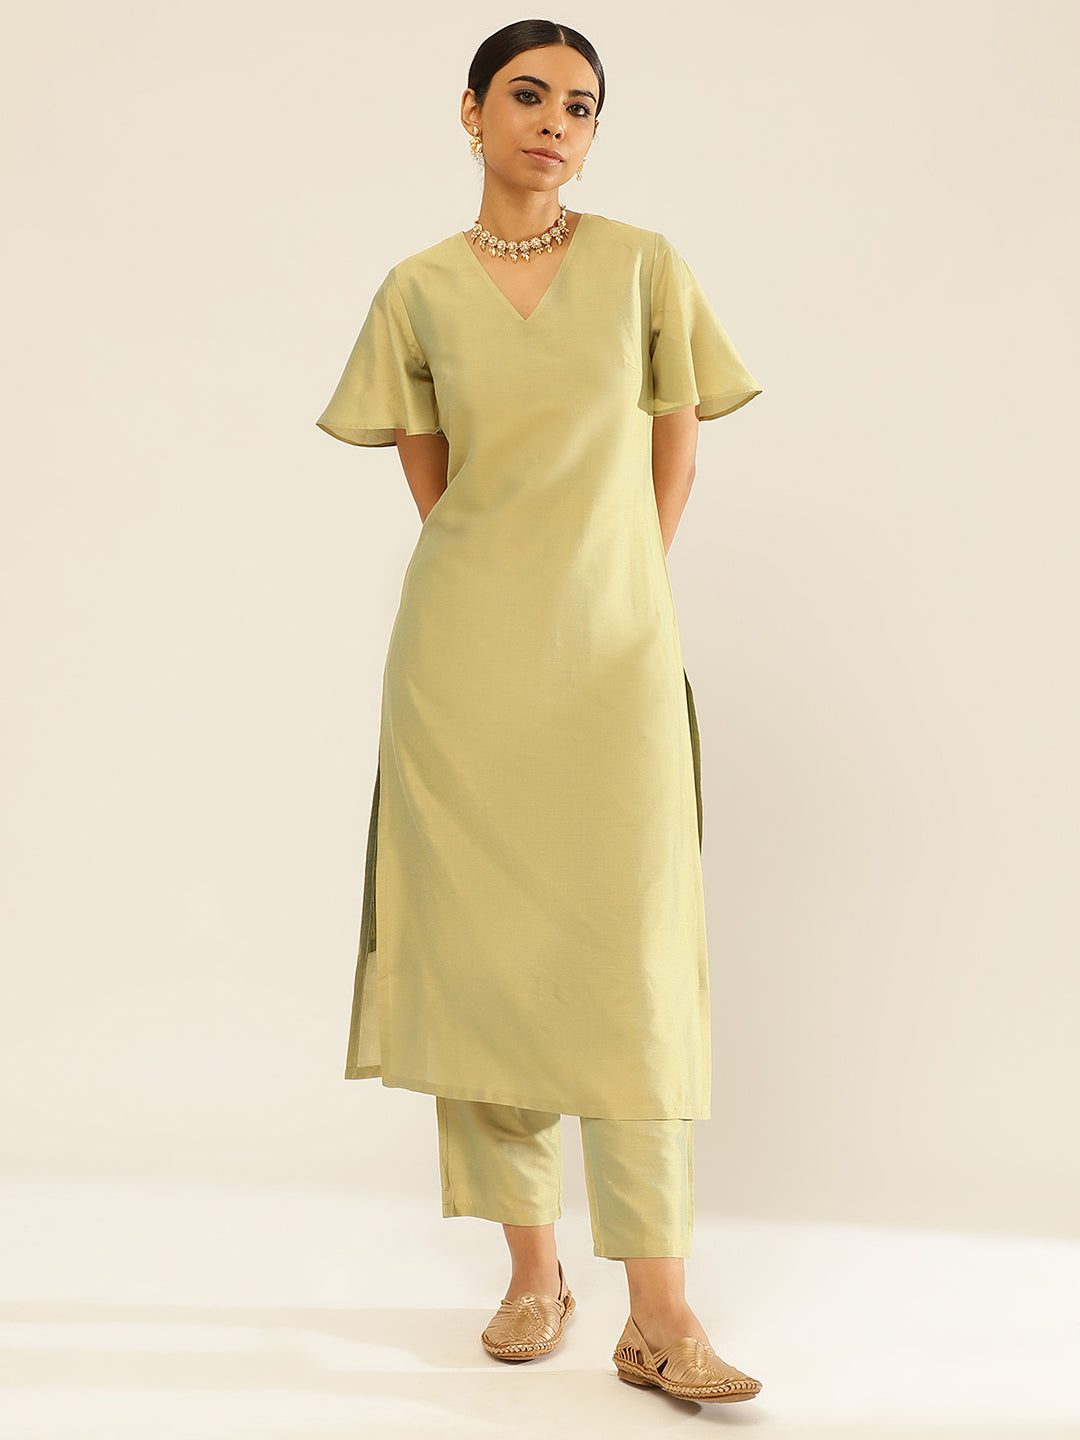 Solid color straight kurta with bell sleeves paired with straight pants